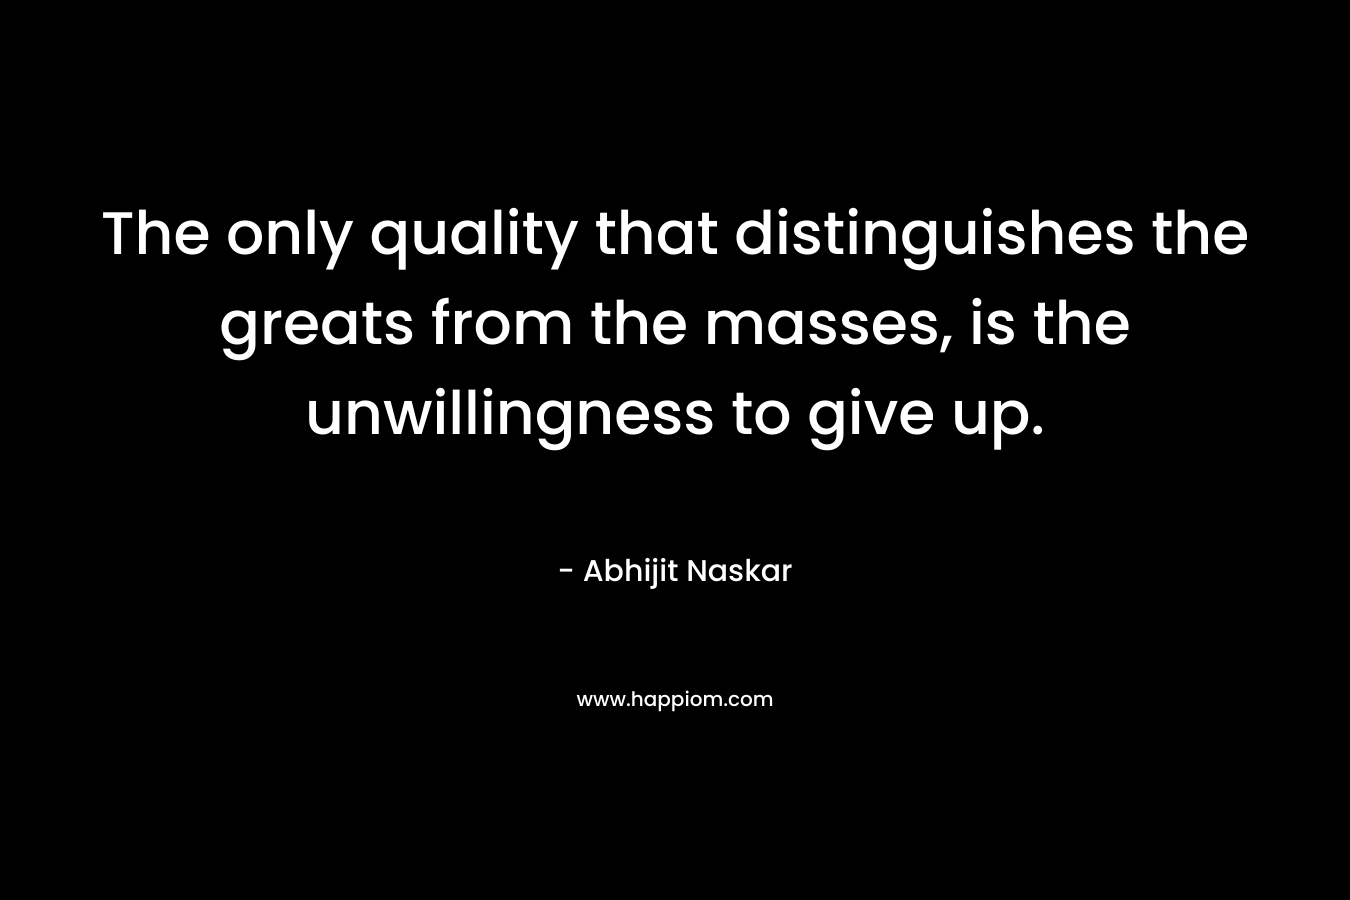 The only quality that distinguishes the greats from the masses, is the unwillingness to give up.